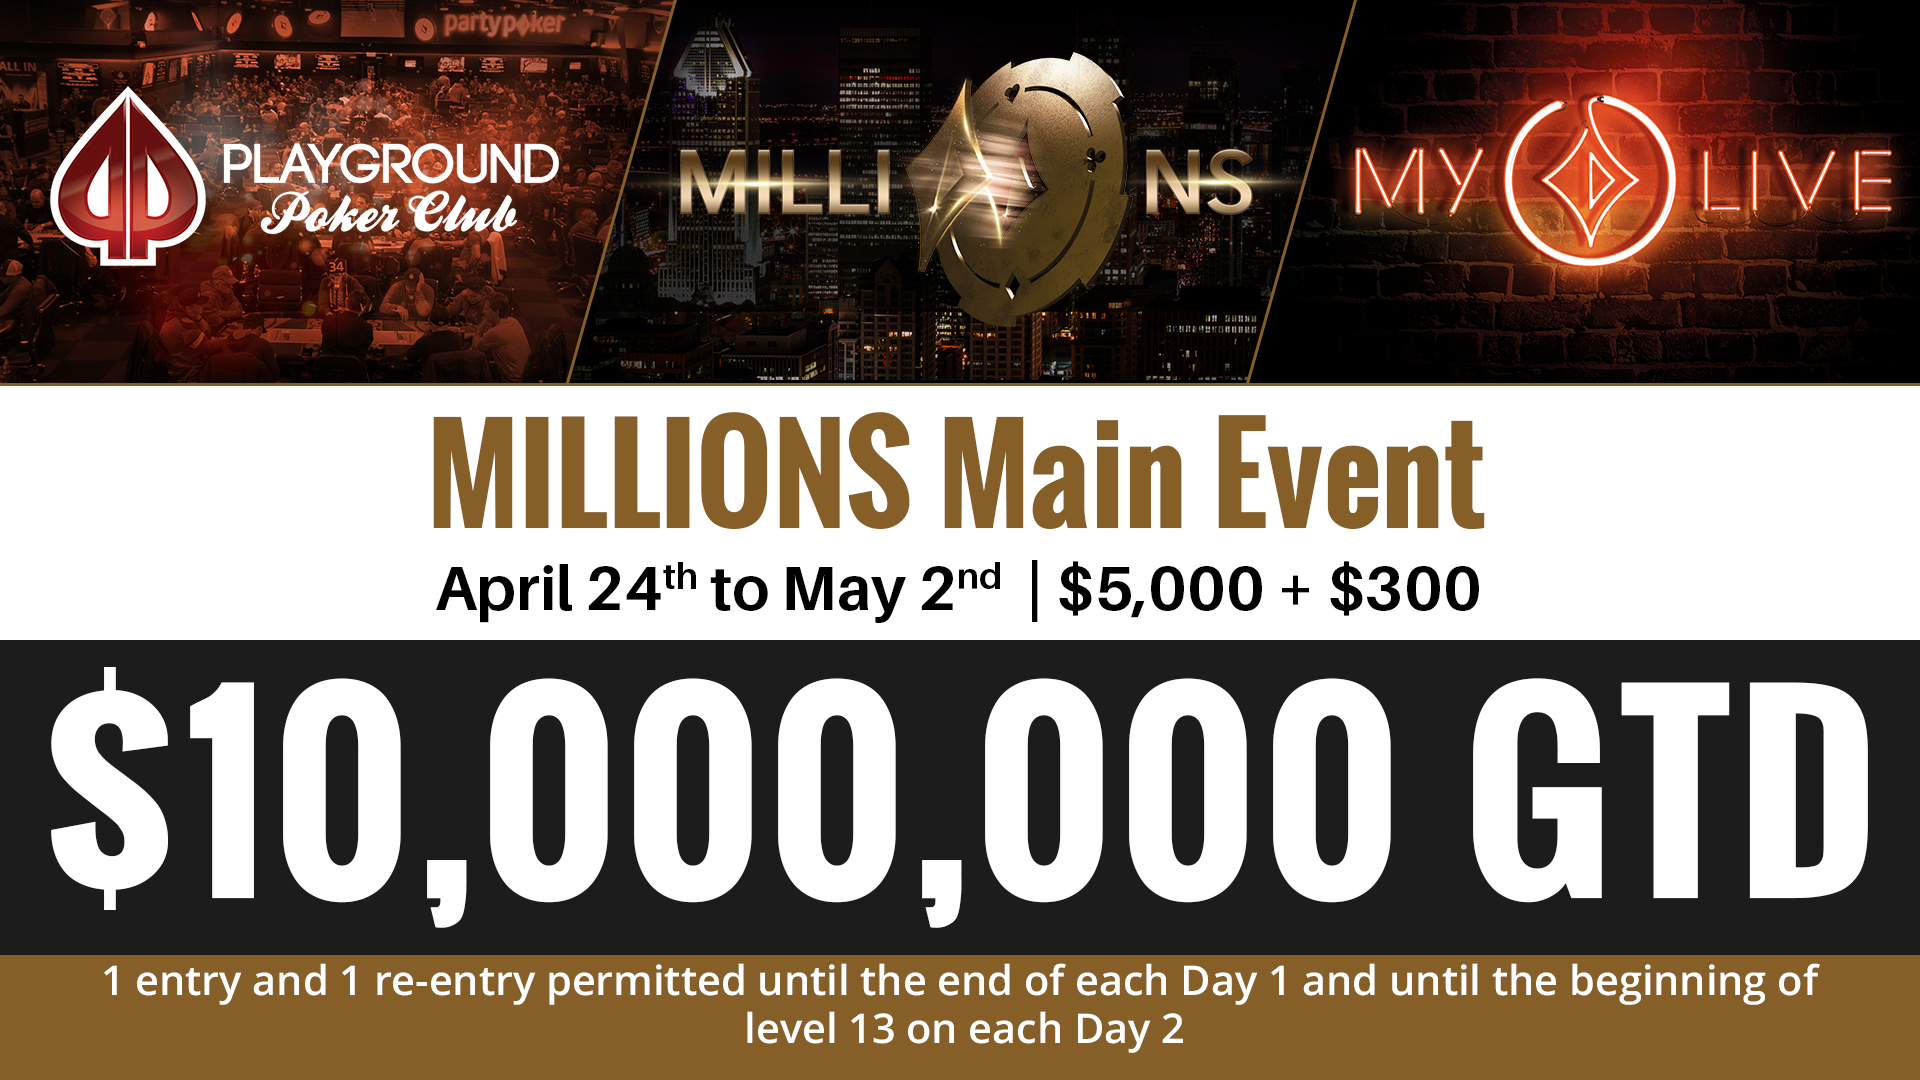 Starting at Noon: Day 1B of the MILLIONS Main Event